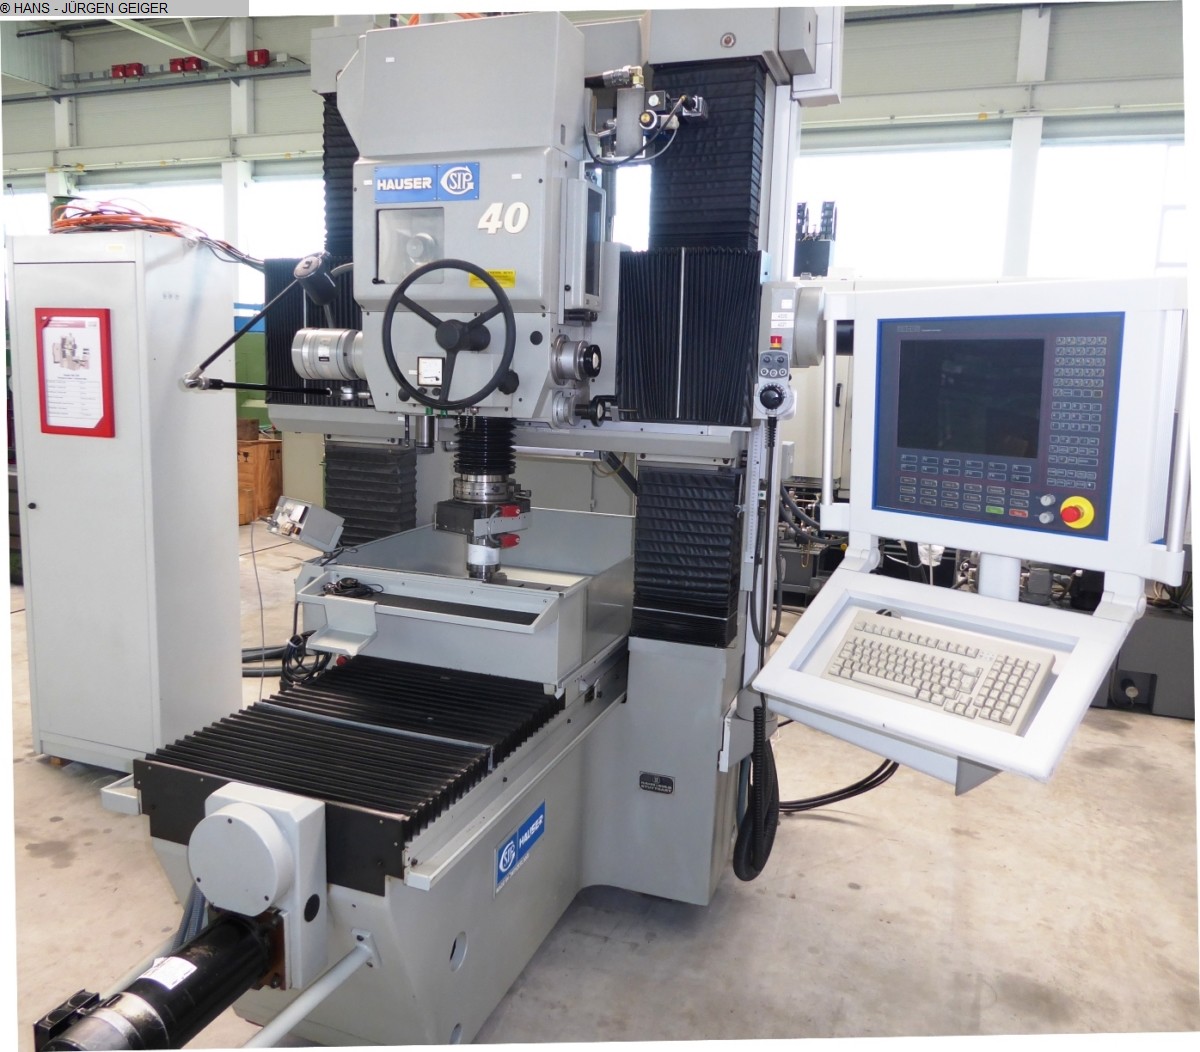 used Metal Processing Jig Grinding Machine HAUSER S 40 - CNC ADCOS 400